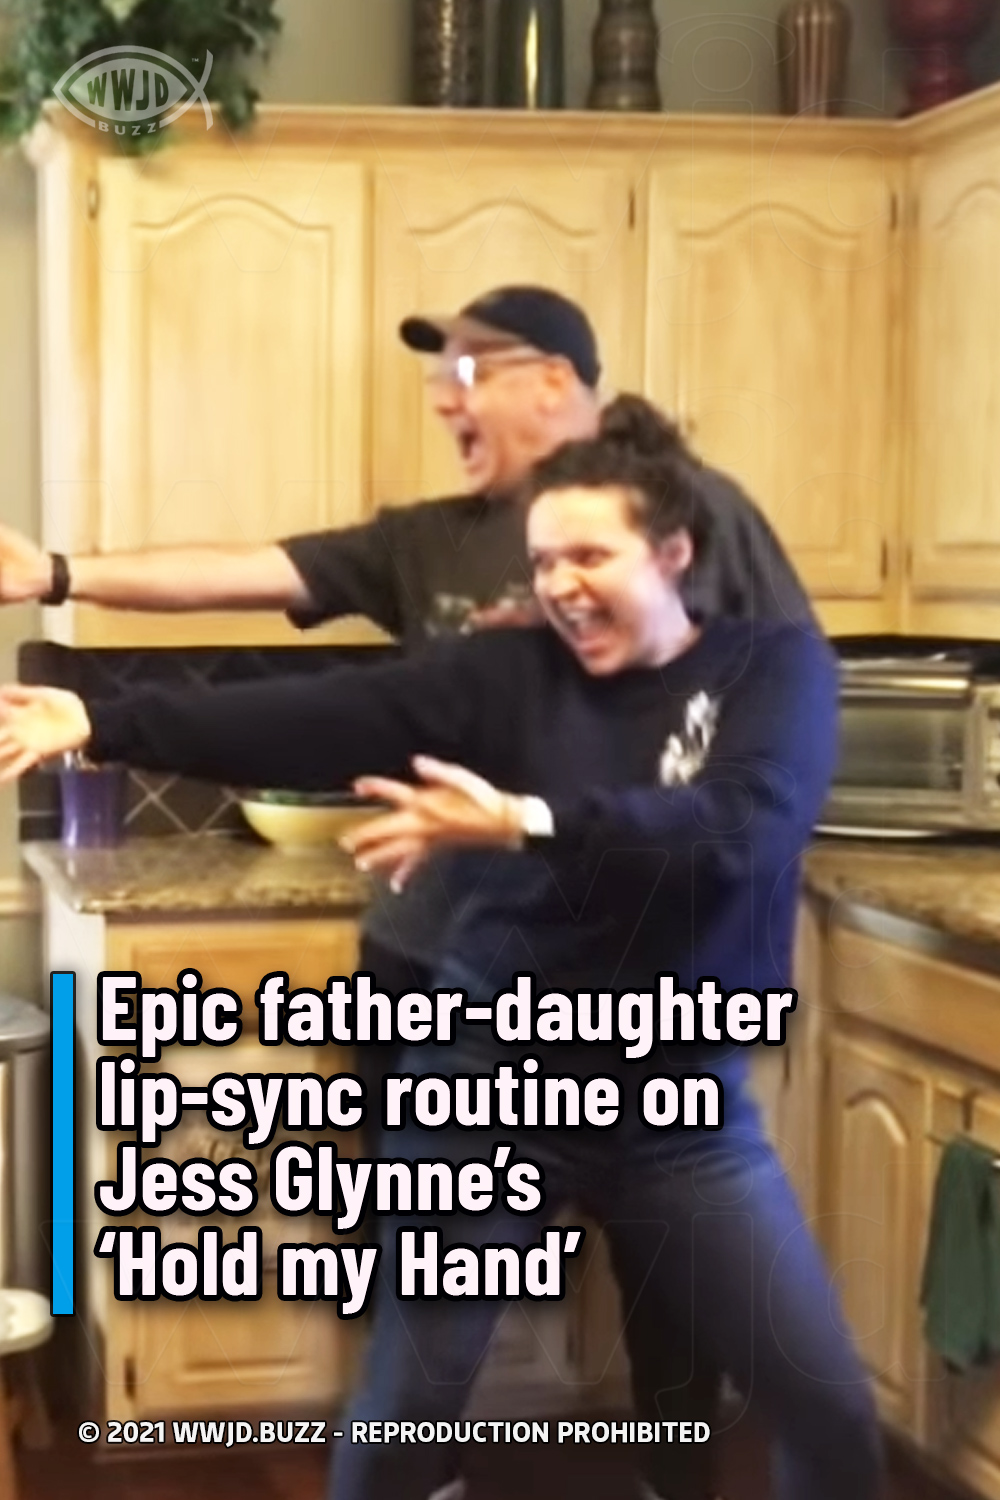 Epic father-daughter lip-sync routine on Jess Glynne’s ‘Hold my Hand’